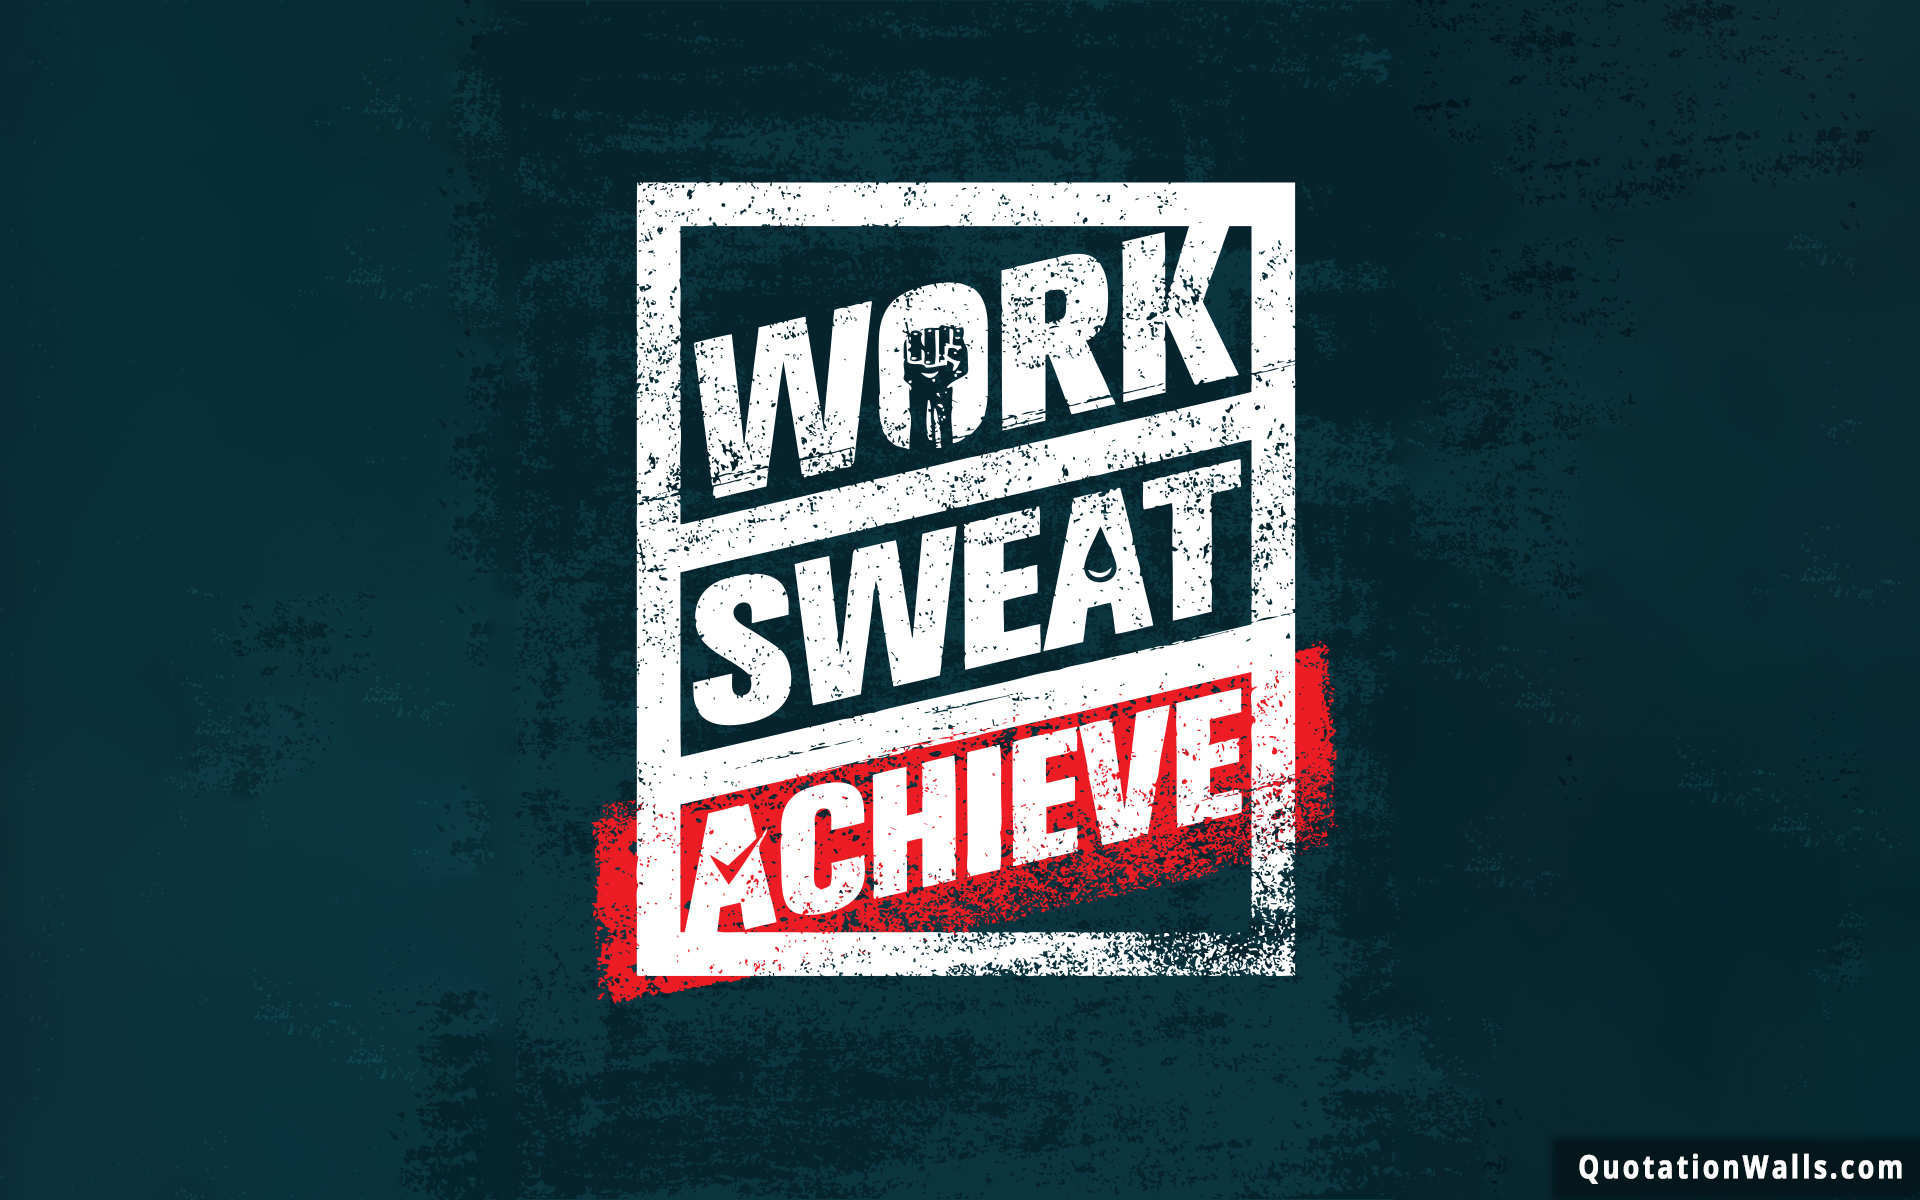 fitness motivation wallpaper hd,font,text,turquoise,logo,graphic design